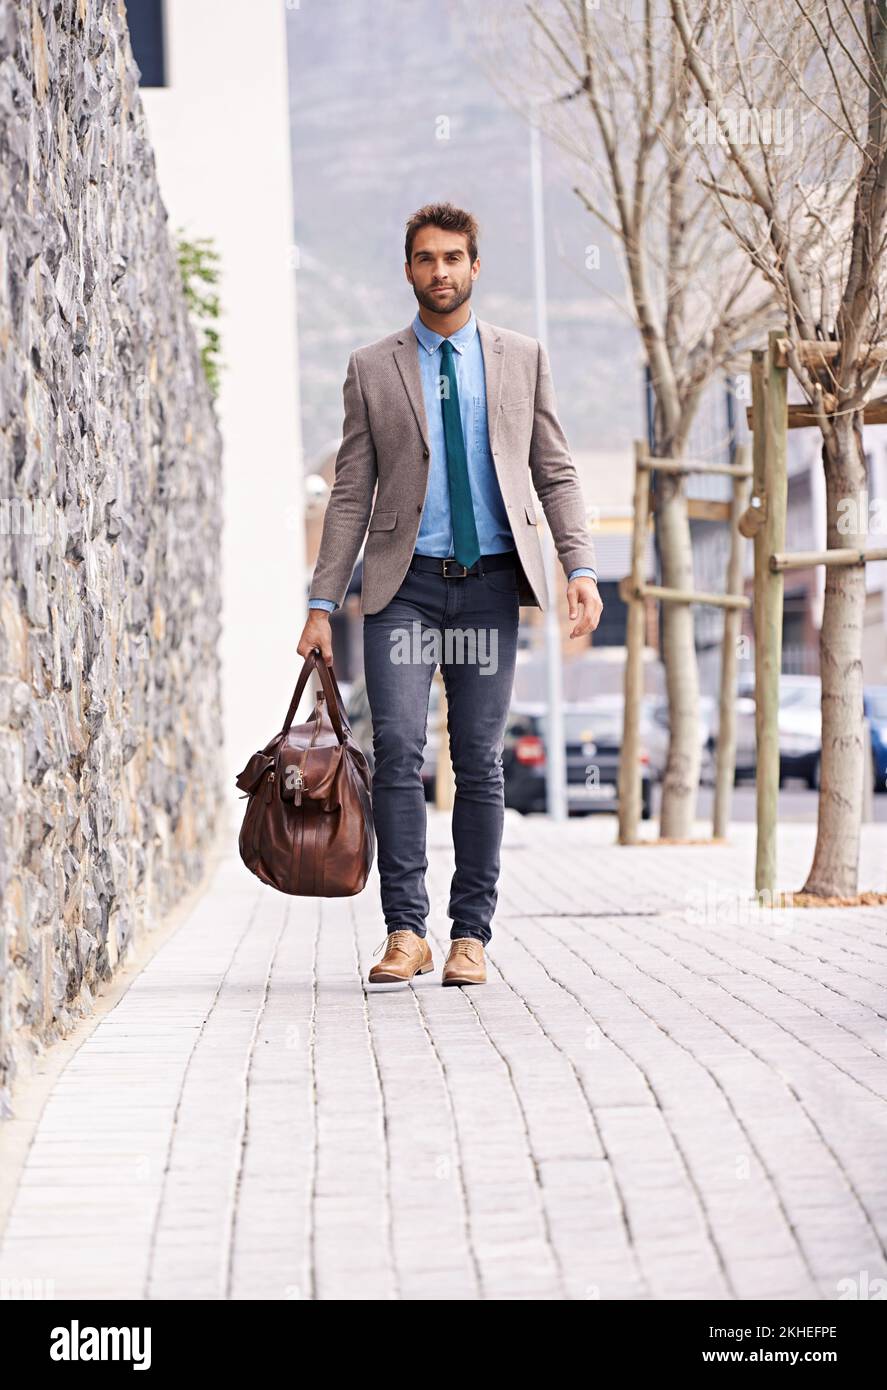 Going places. a handsome and stylish young businessman walking in an urban setting. Stock Photo